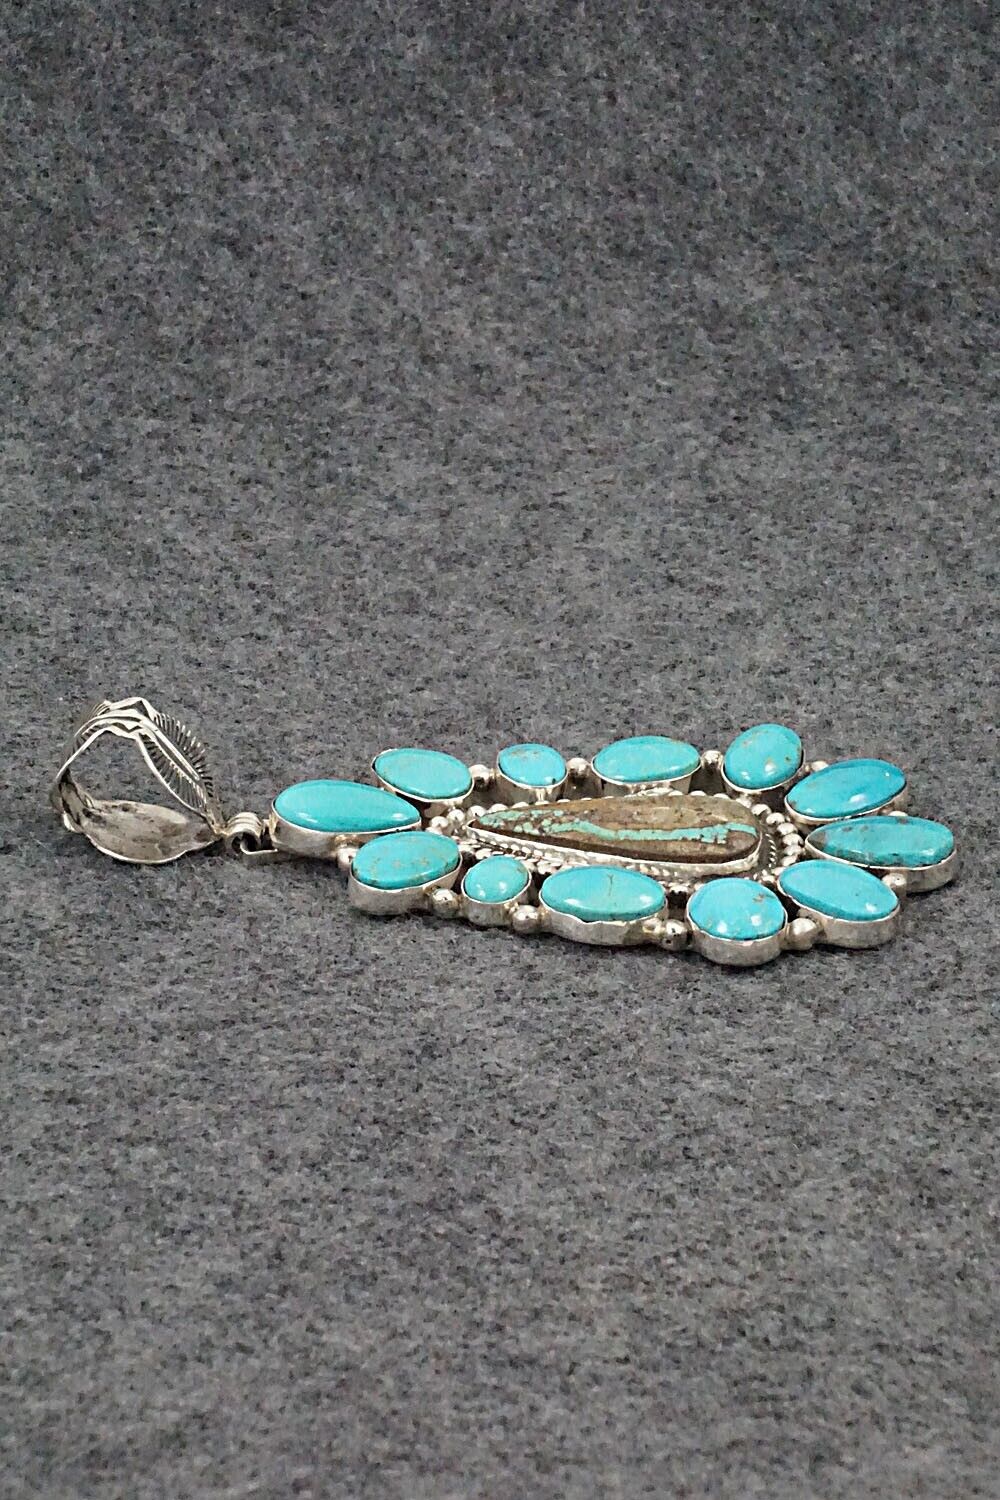 Turquoise and Sterling Silver Pendant - Vernon Johnson